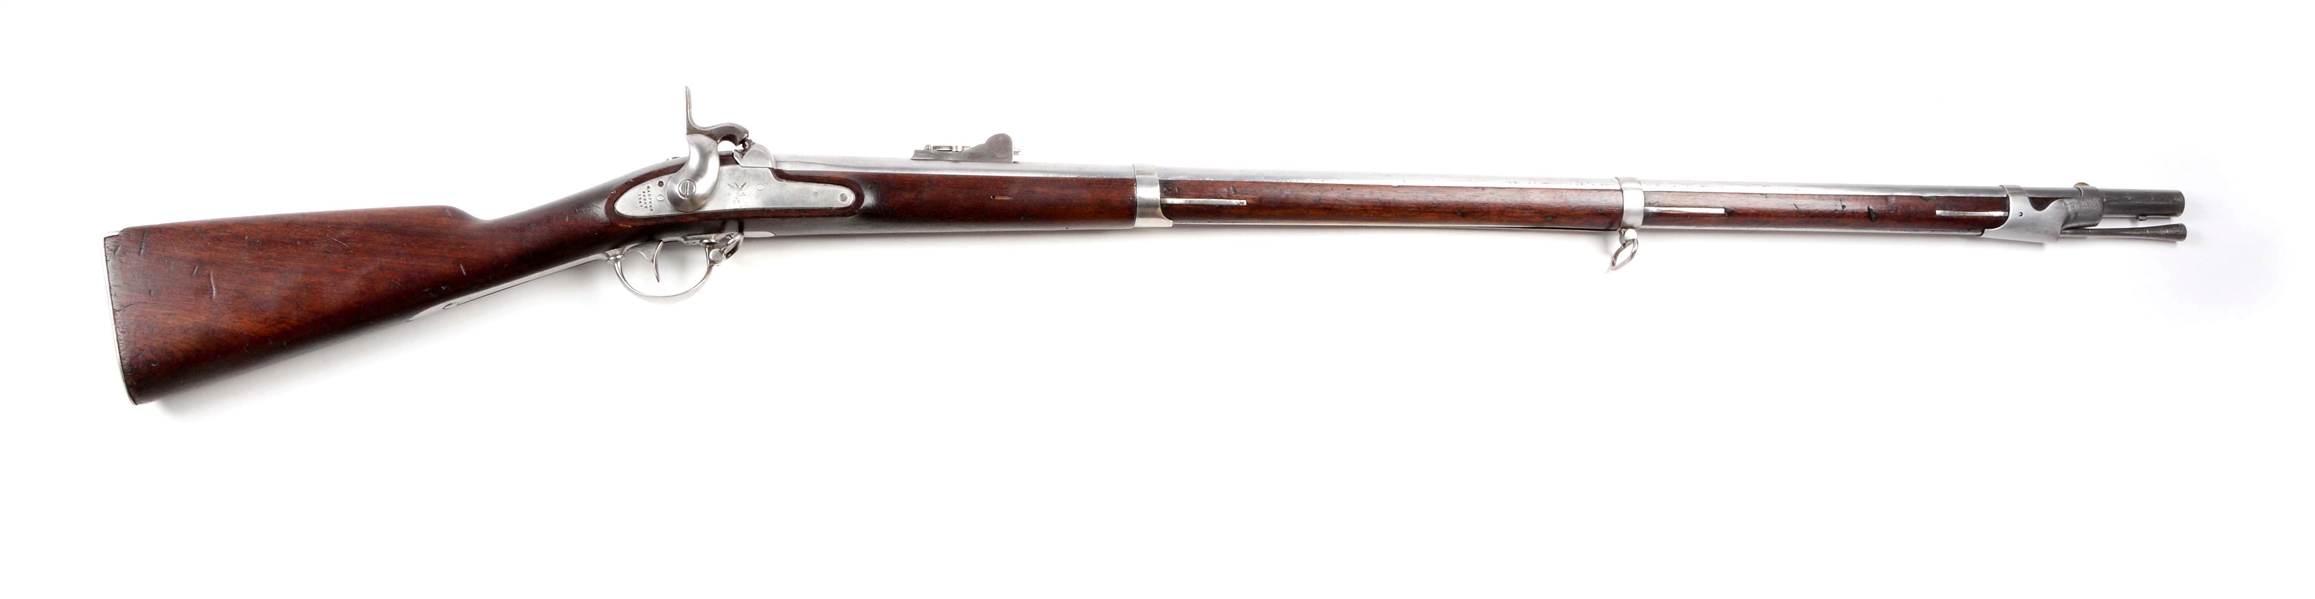 (A) U.S. MODEL 1842 RIFLED & SIGHTED PERCUSSION MUSKET BY HARPERS FERRY.